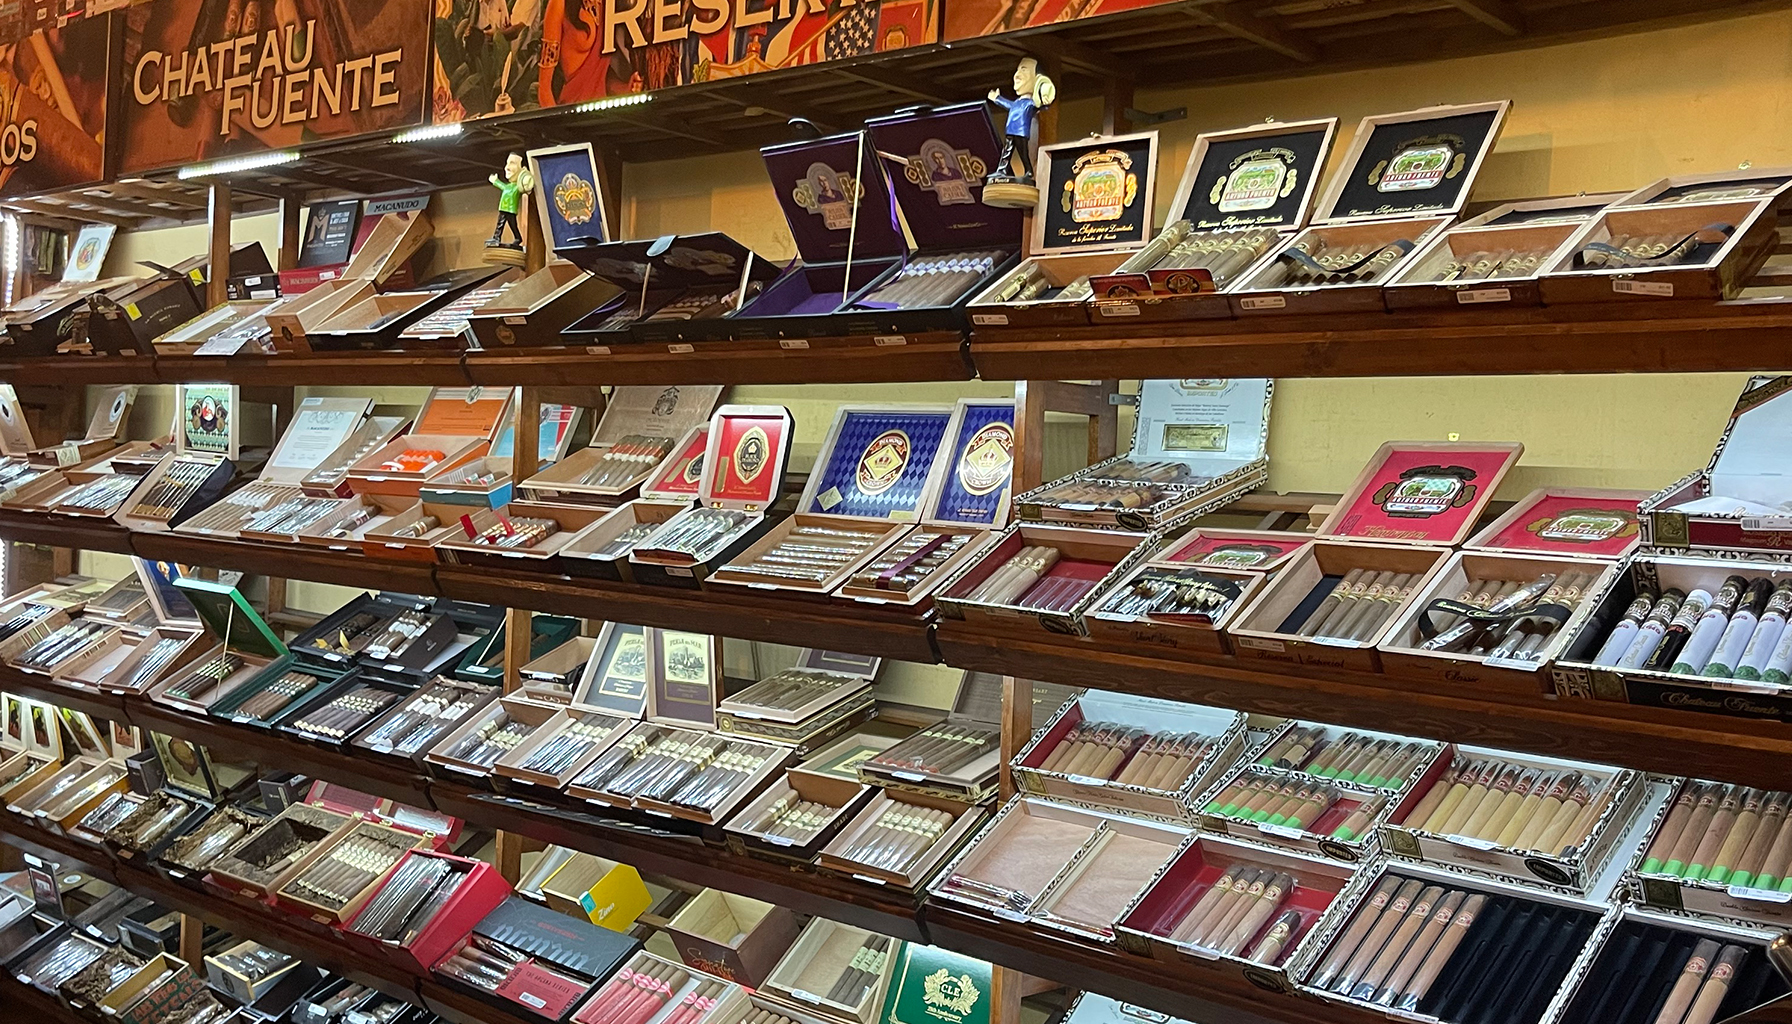 A diverse selection of premium cigars in a well-decorated cigar shop